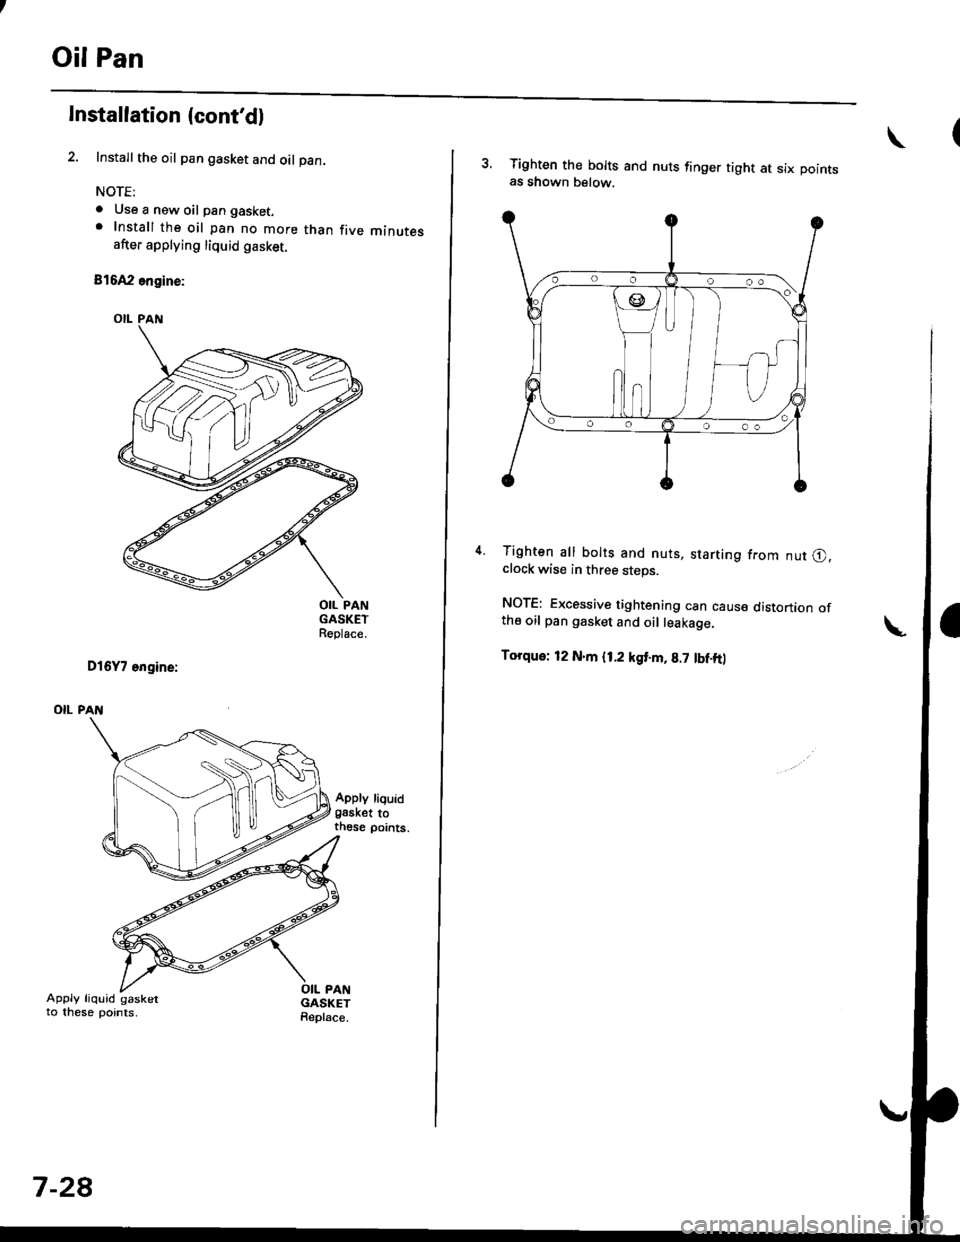 HONDA CIVIC 1999 6.G Workshop Manual Oil Pan
lnstallation (contdl
Install the oil pan gasket and oil pan
NOTE:
a Use a new oil pan gasket.. Install the oil pan no more than five minutesafter applying liquid gasket.
816A2 engine:
OIL PAN